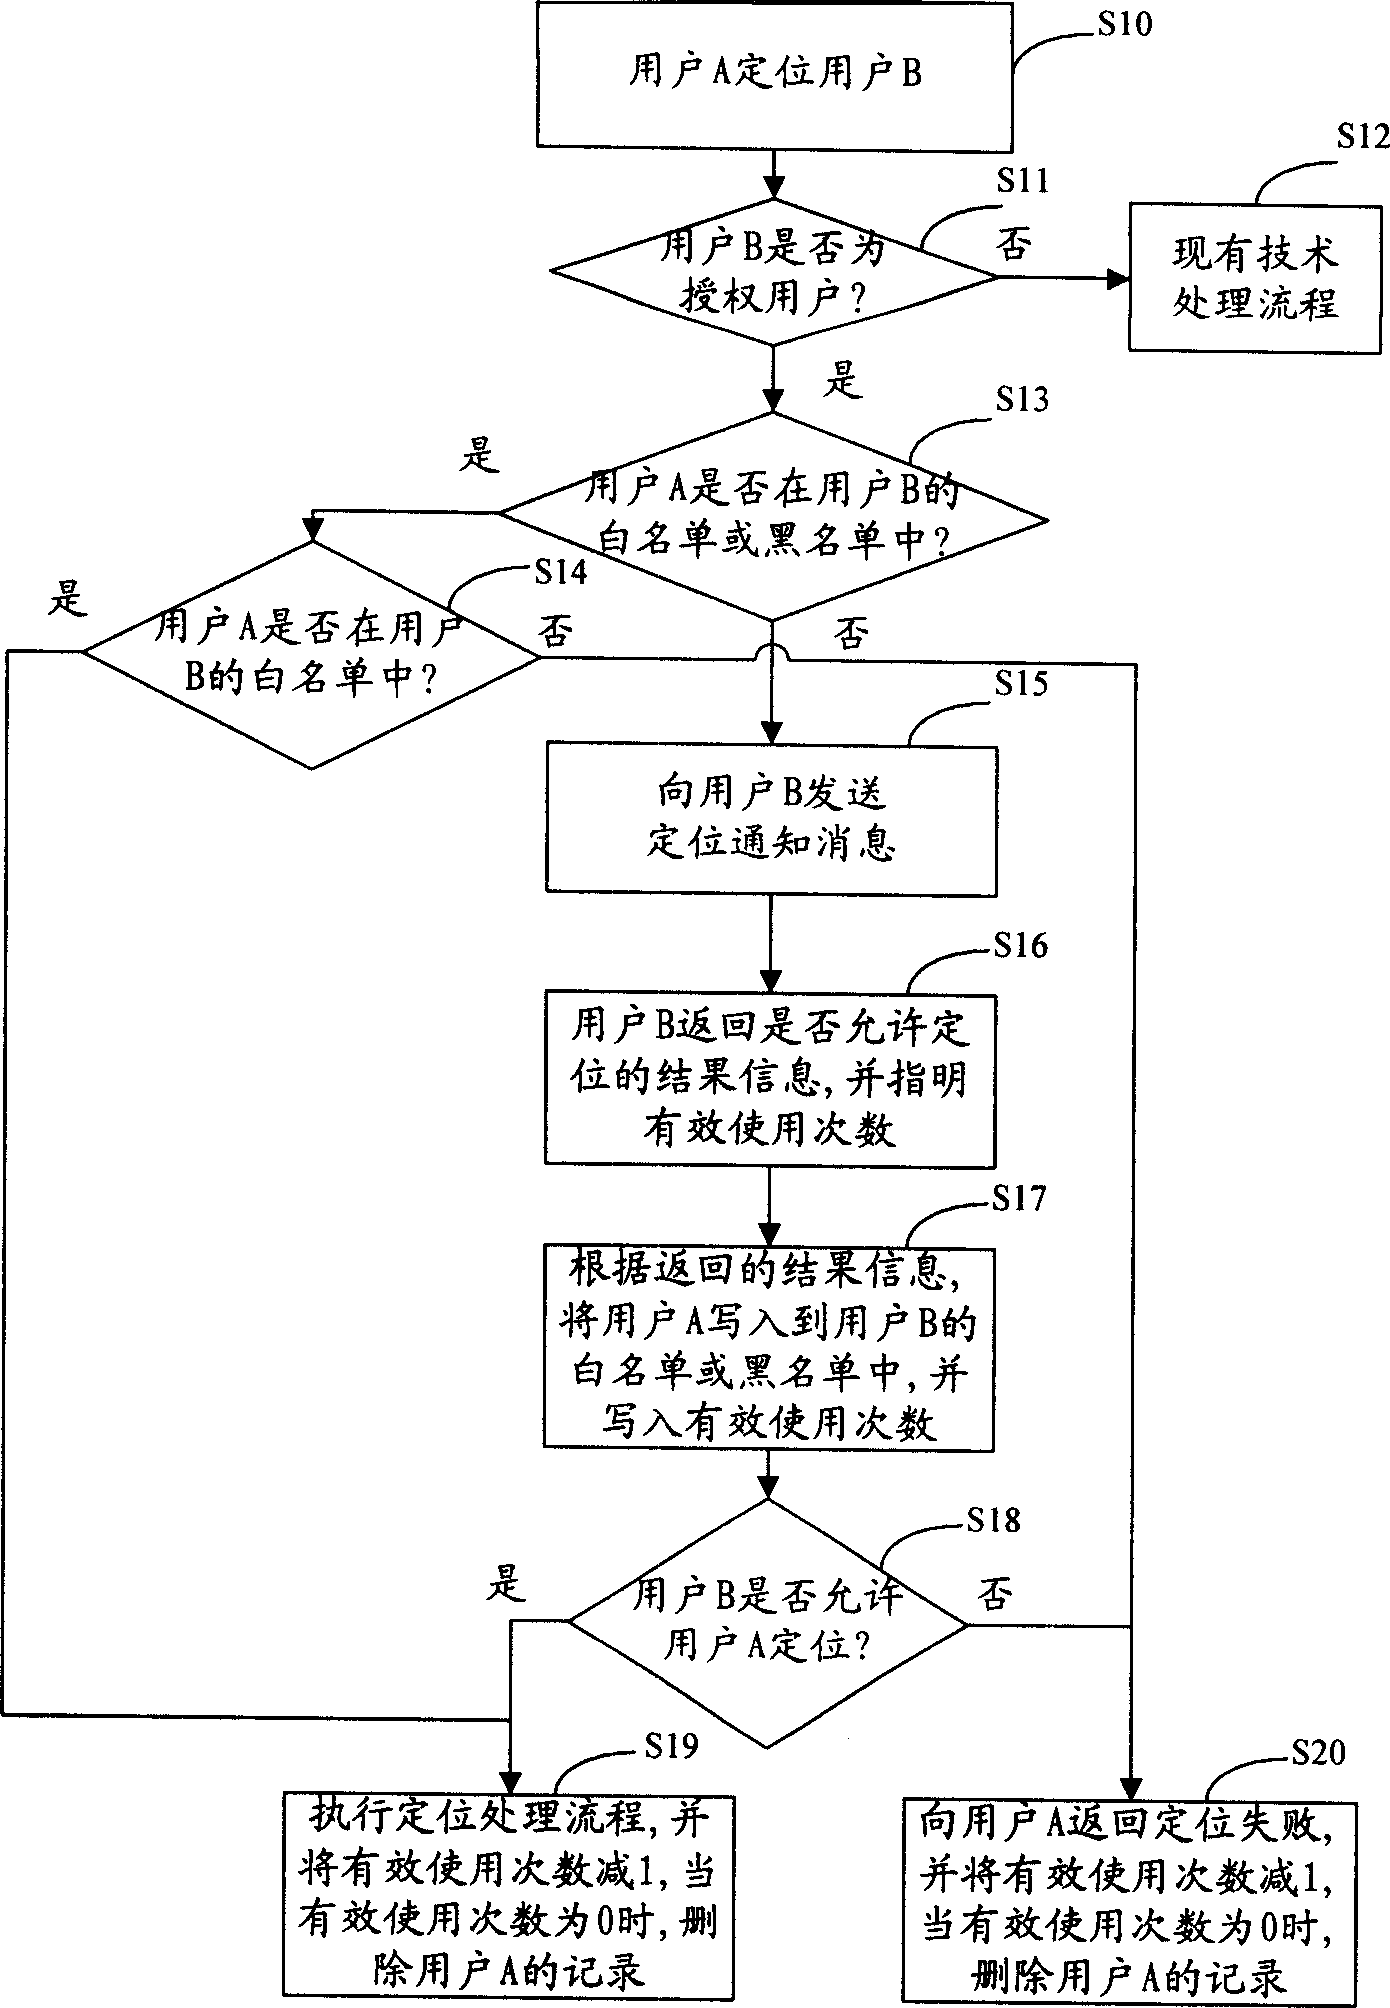 Method for realizing enabled positioning and positioning platform system